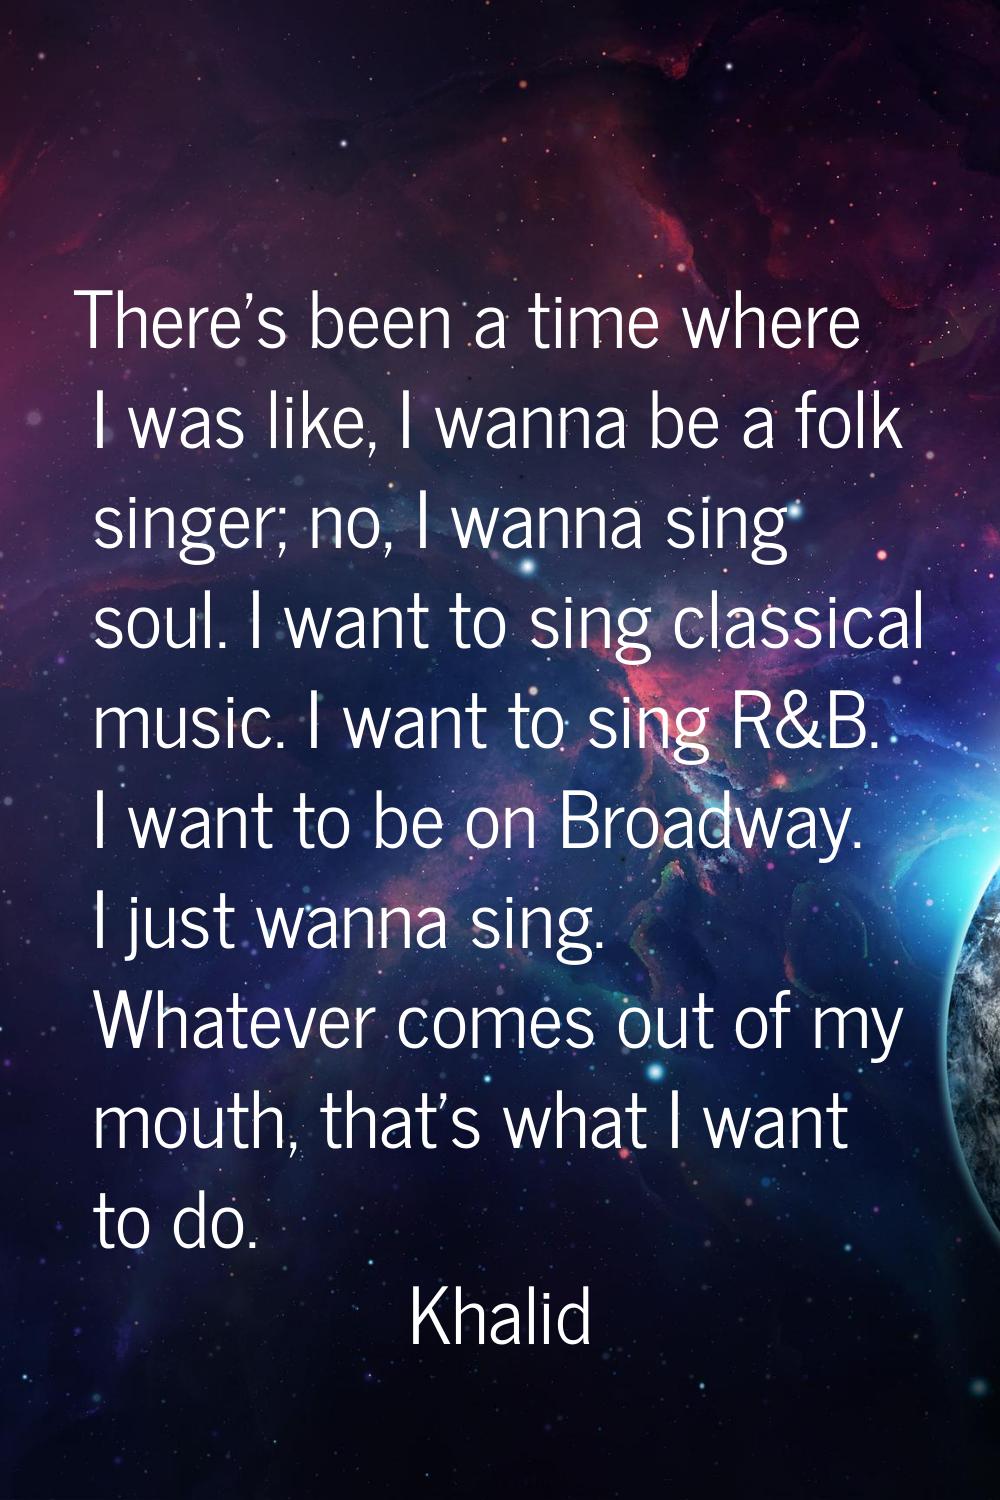 There's been a time where I was like, I wanna be a folk singer; no, I wanna sing soul. I want to si